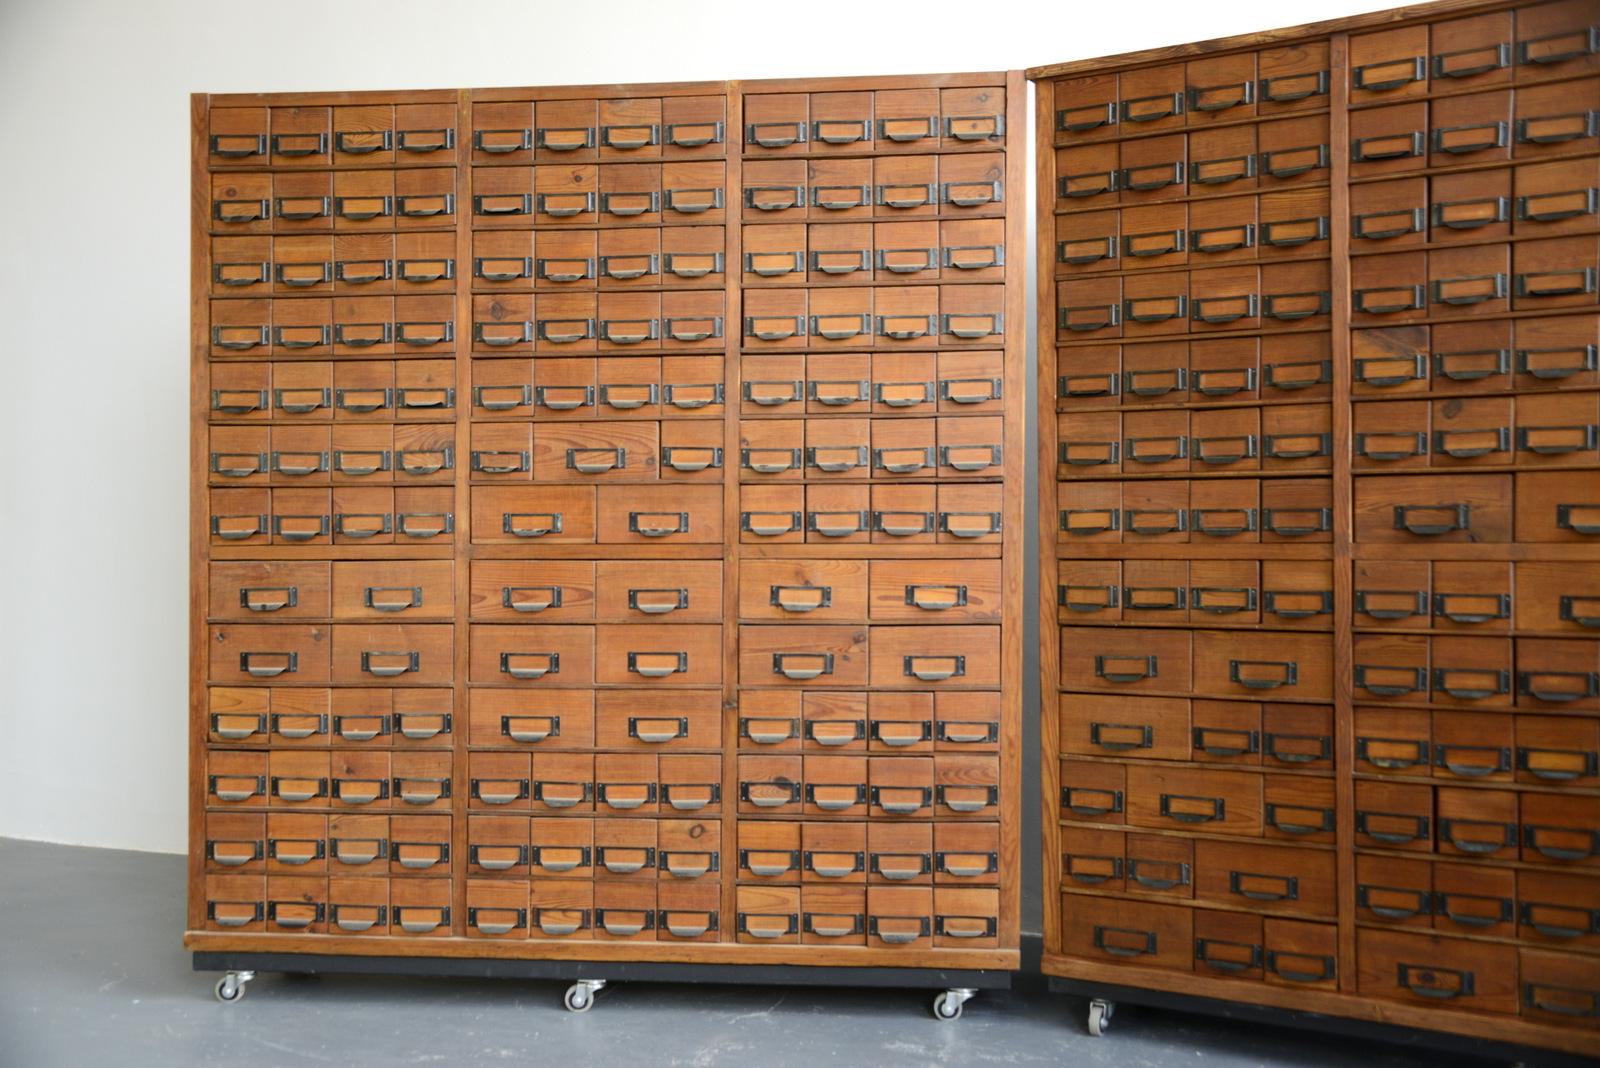 Wooden dental surgery record cabinets, circa 1950s

- Price is per cabinet (2 available)
- Solid pine cabinet and drawers
- Original steel handles with label holders
- Originally used in a dental surgery for patients records
- Polish 1950s
-